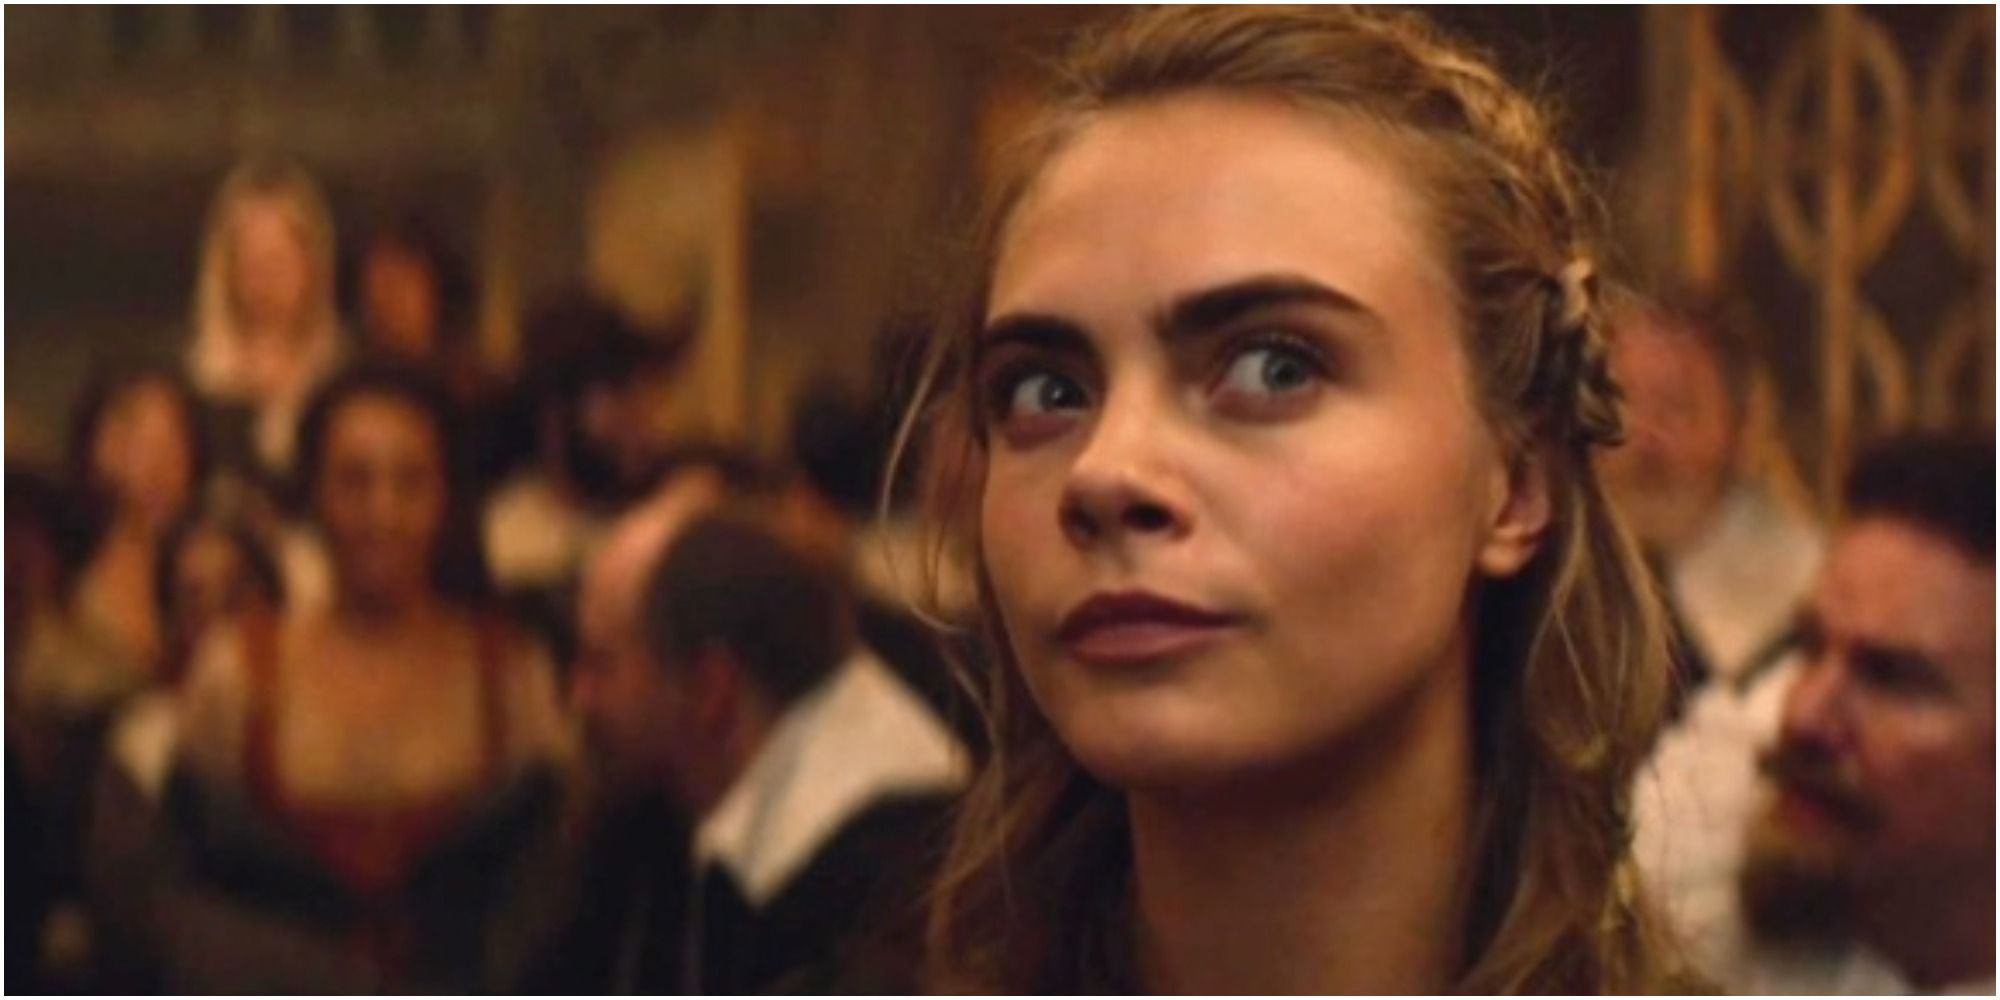 10 Best Cara Delevingne Movies Ranked (According To Rotten Tomatoes) RELATED Riverdale 10 Worst Things The Teens Have Done Ranked NEXT Rami Maleks 10 Best Movies (According To Rotten Tomatoes)